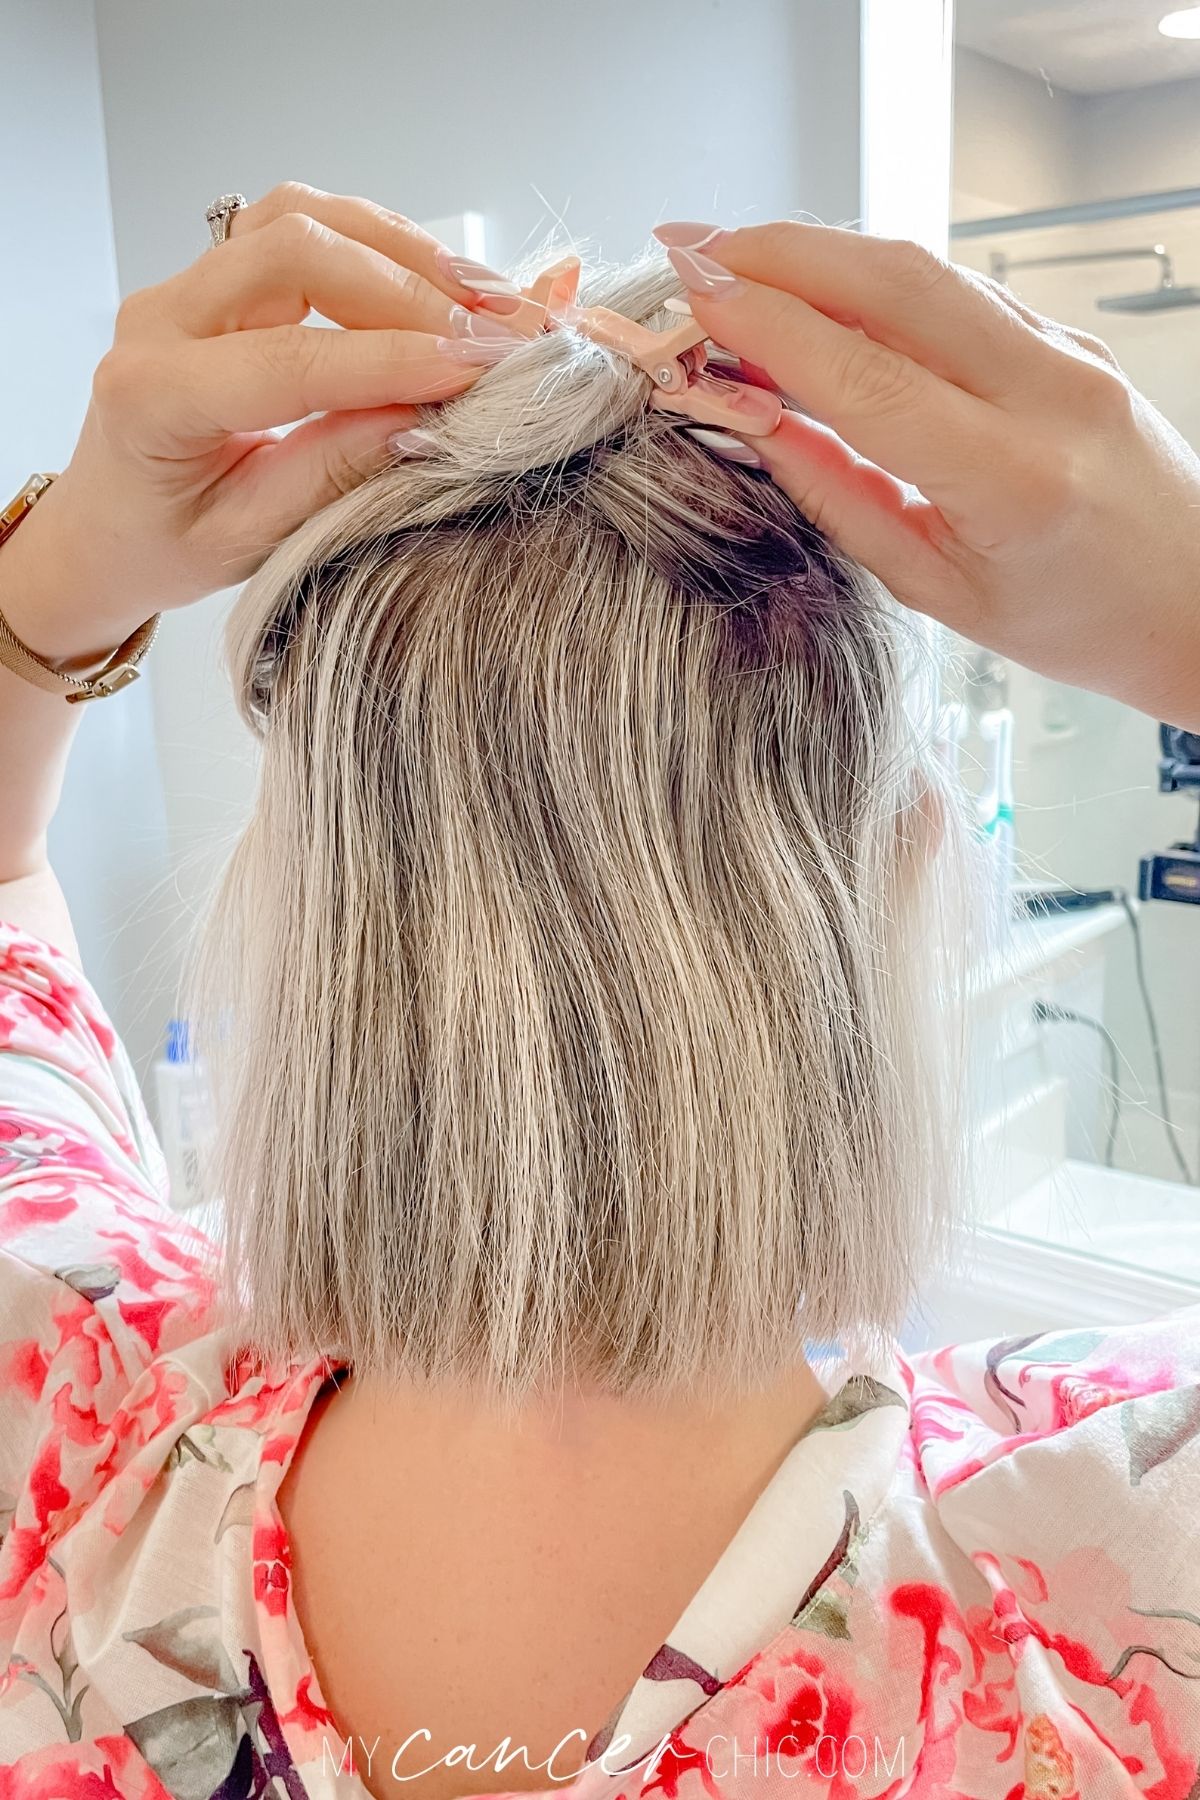 woman is applying hair clip to separate the top layer of hair from the bottom layer